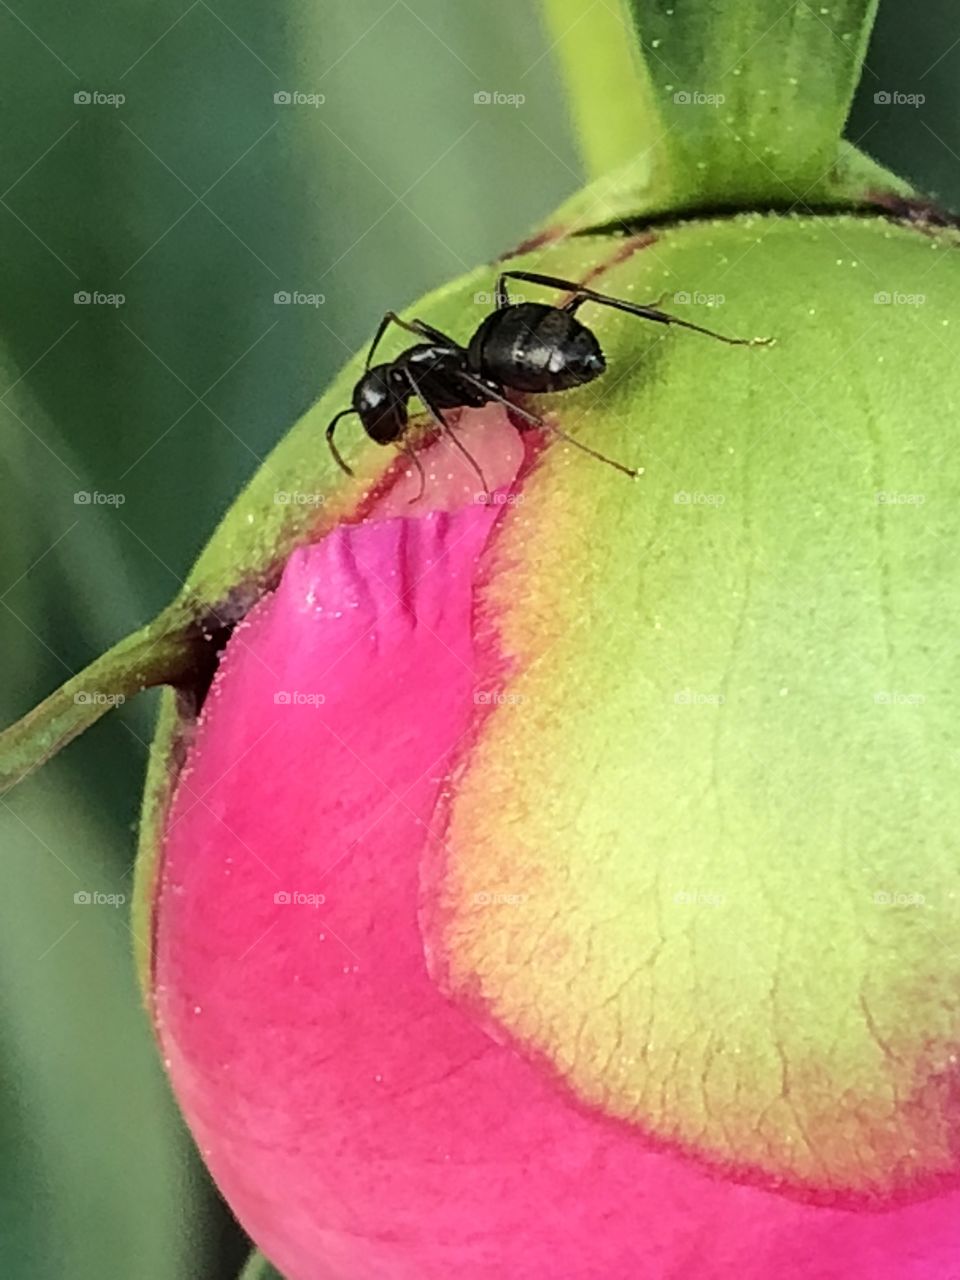 Ant helps open the peony flower 